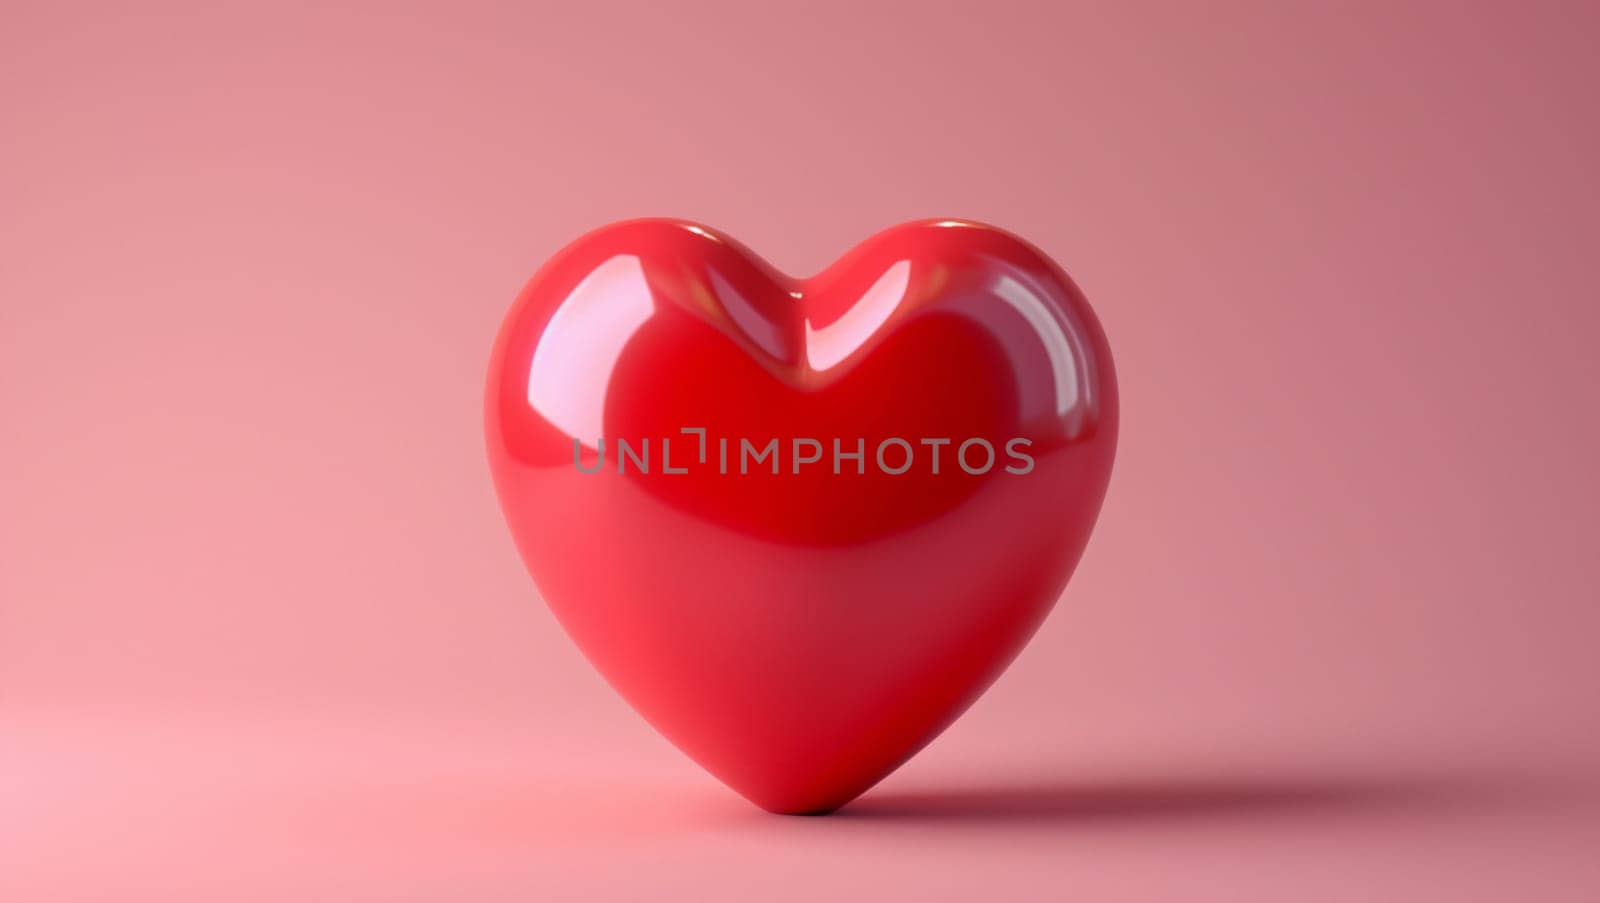 Red heart on pink background. A great symbol of love, care and relationships. Valentine's Day. by Sneznyj